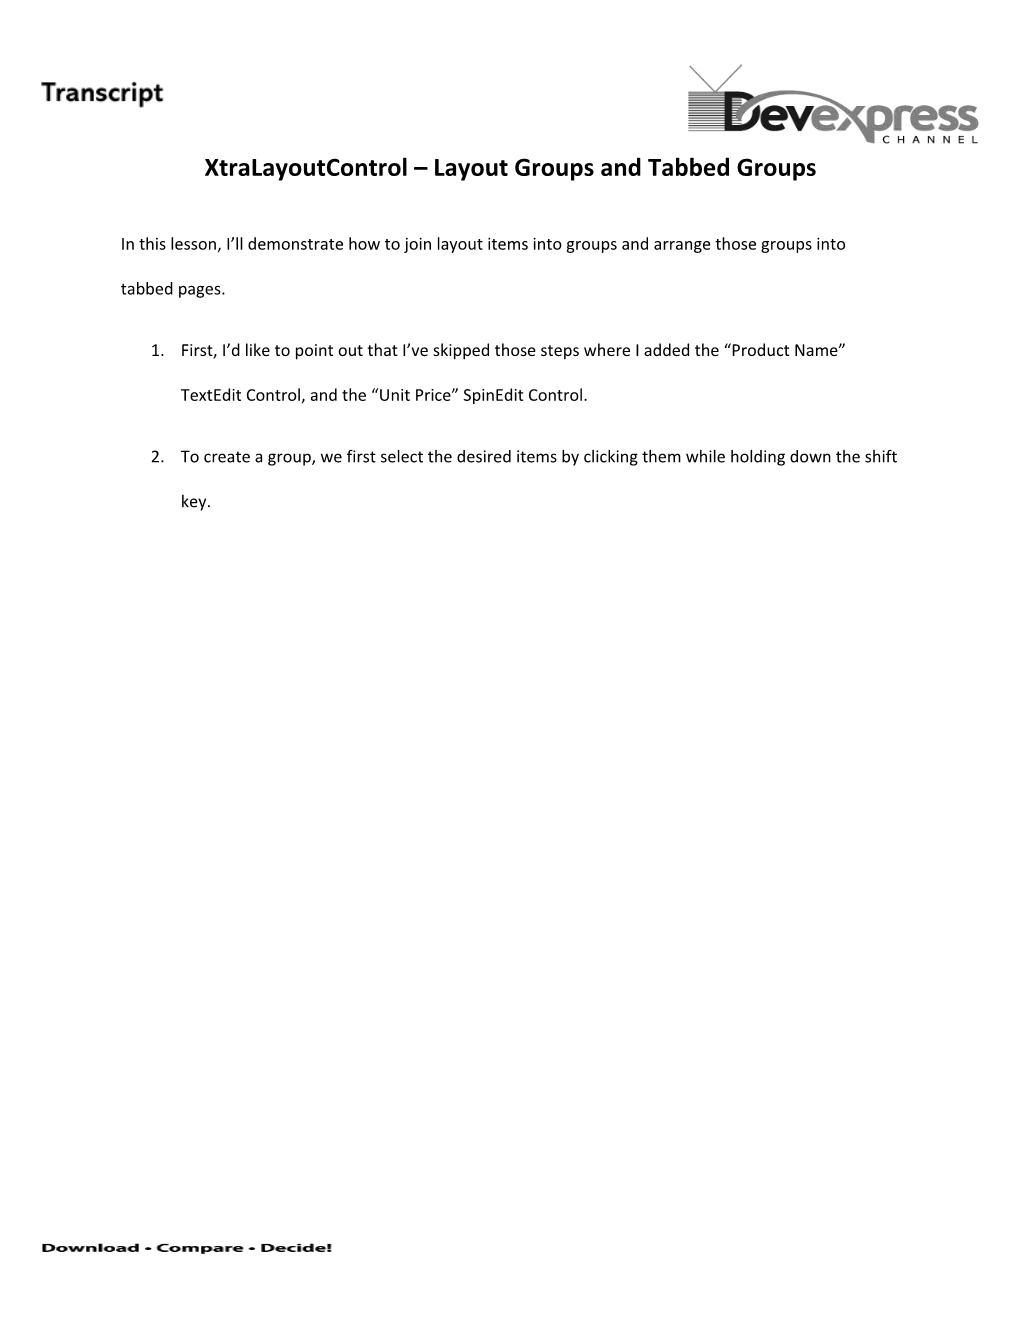 Xtralayoutcontrol Layout Groups and Tabbed Groups